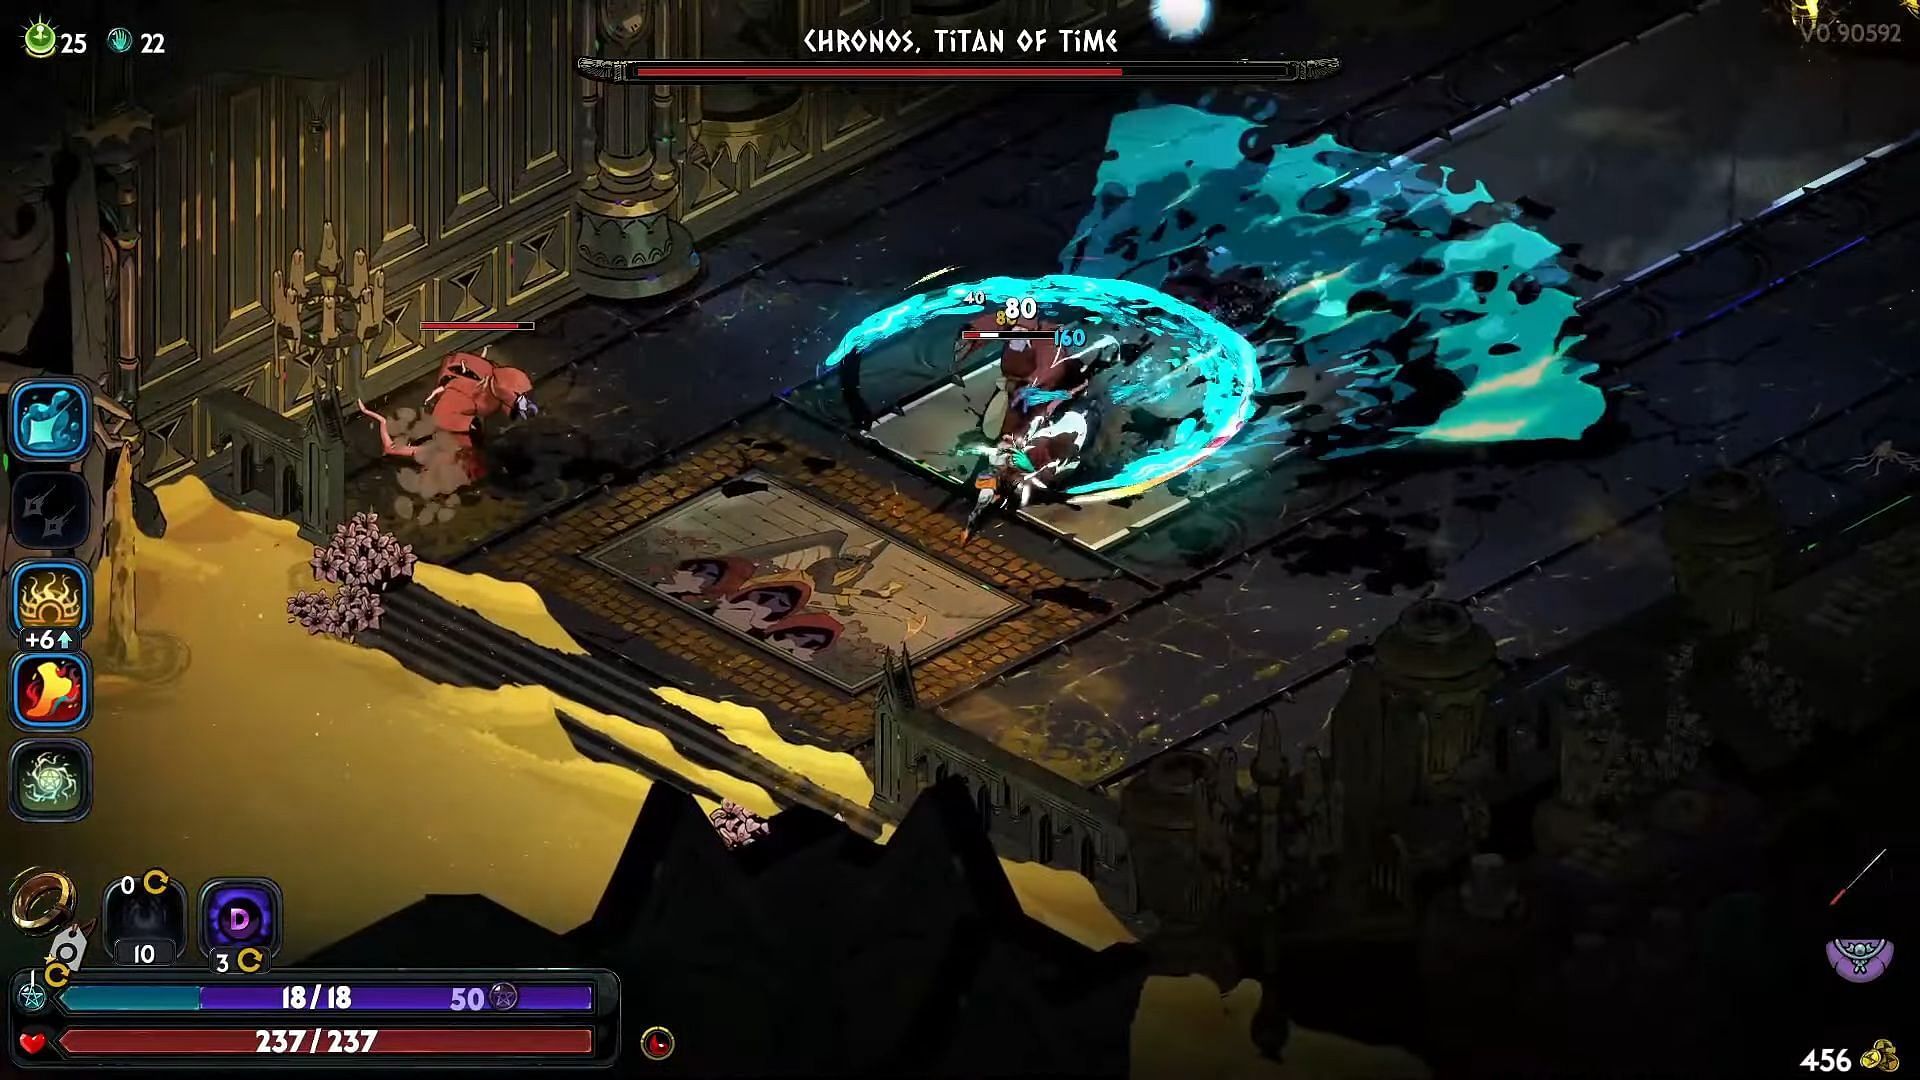 Chronos shields himself and summons his minions in the first phase (Image via YouTube/Azulazu || Supergiant Games)